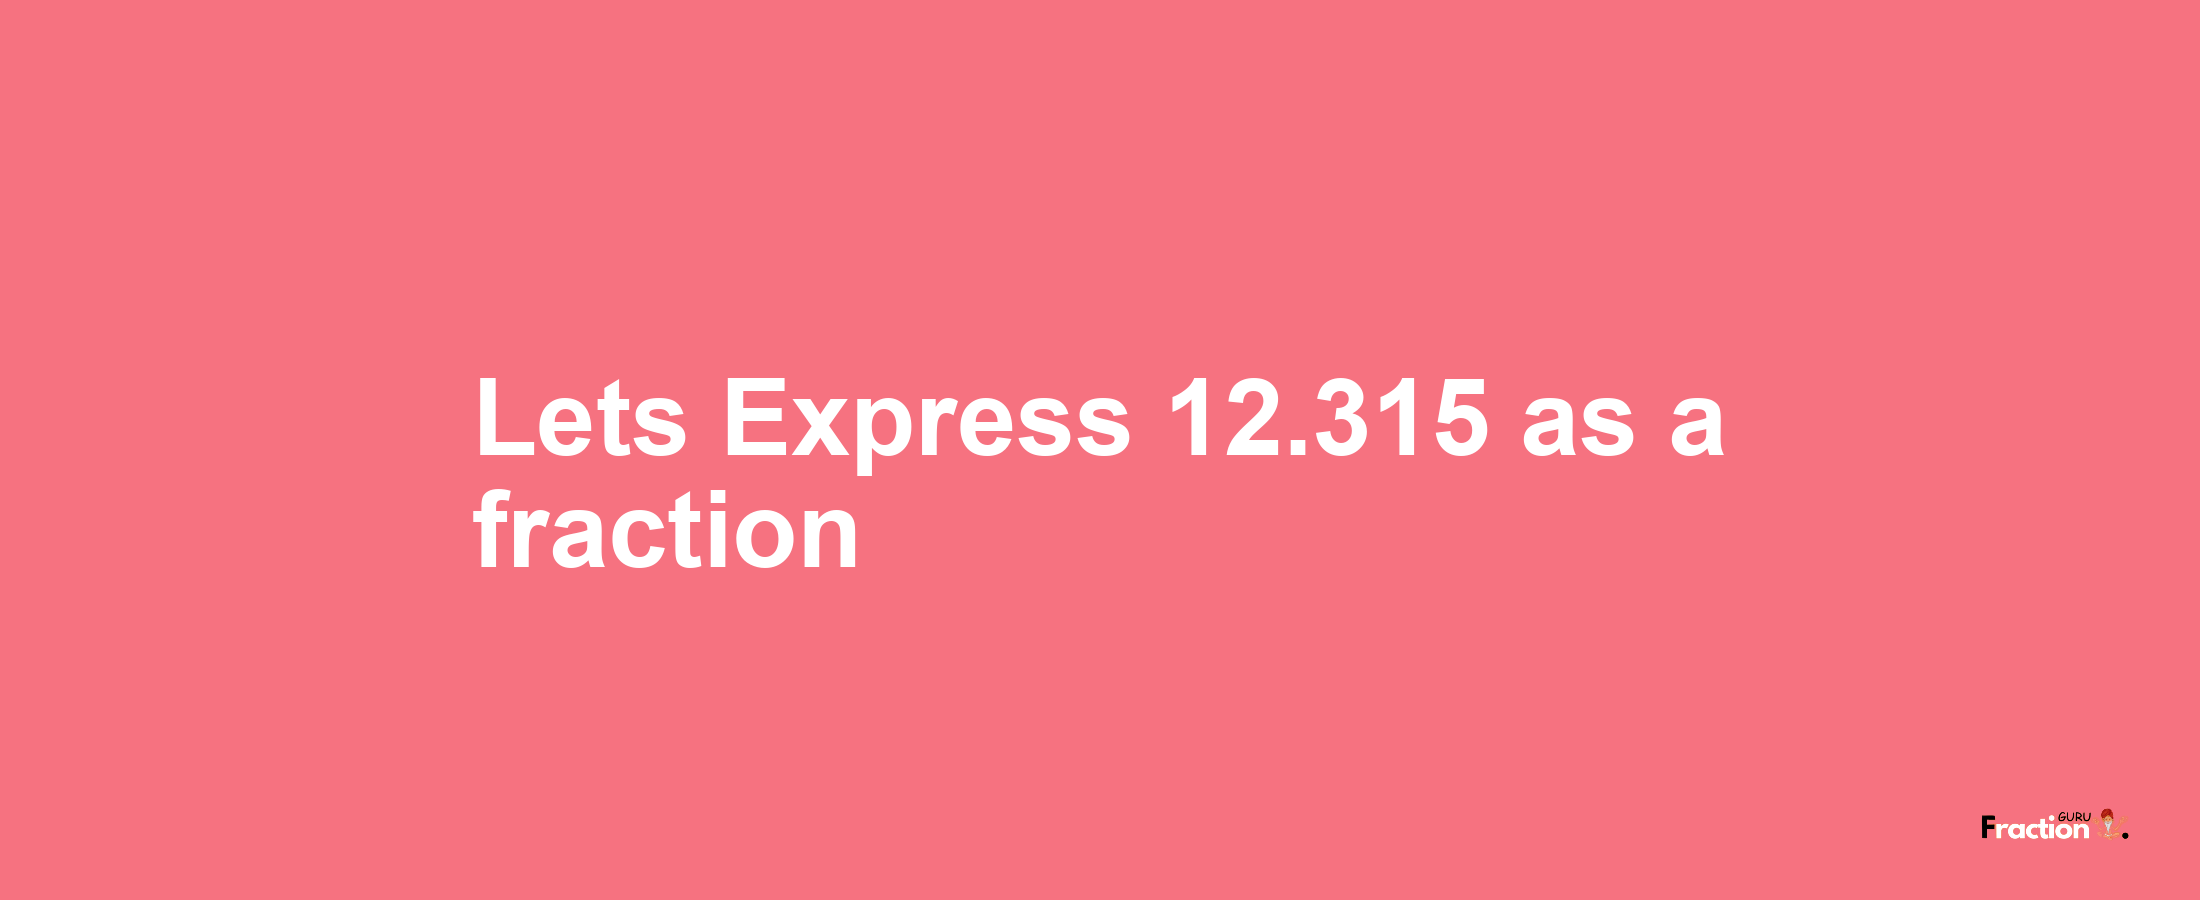 Lets Express 12.315 as afraction